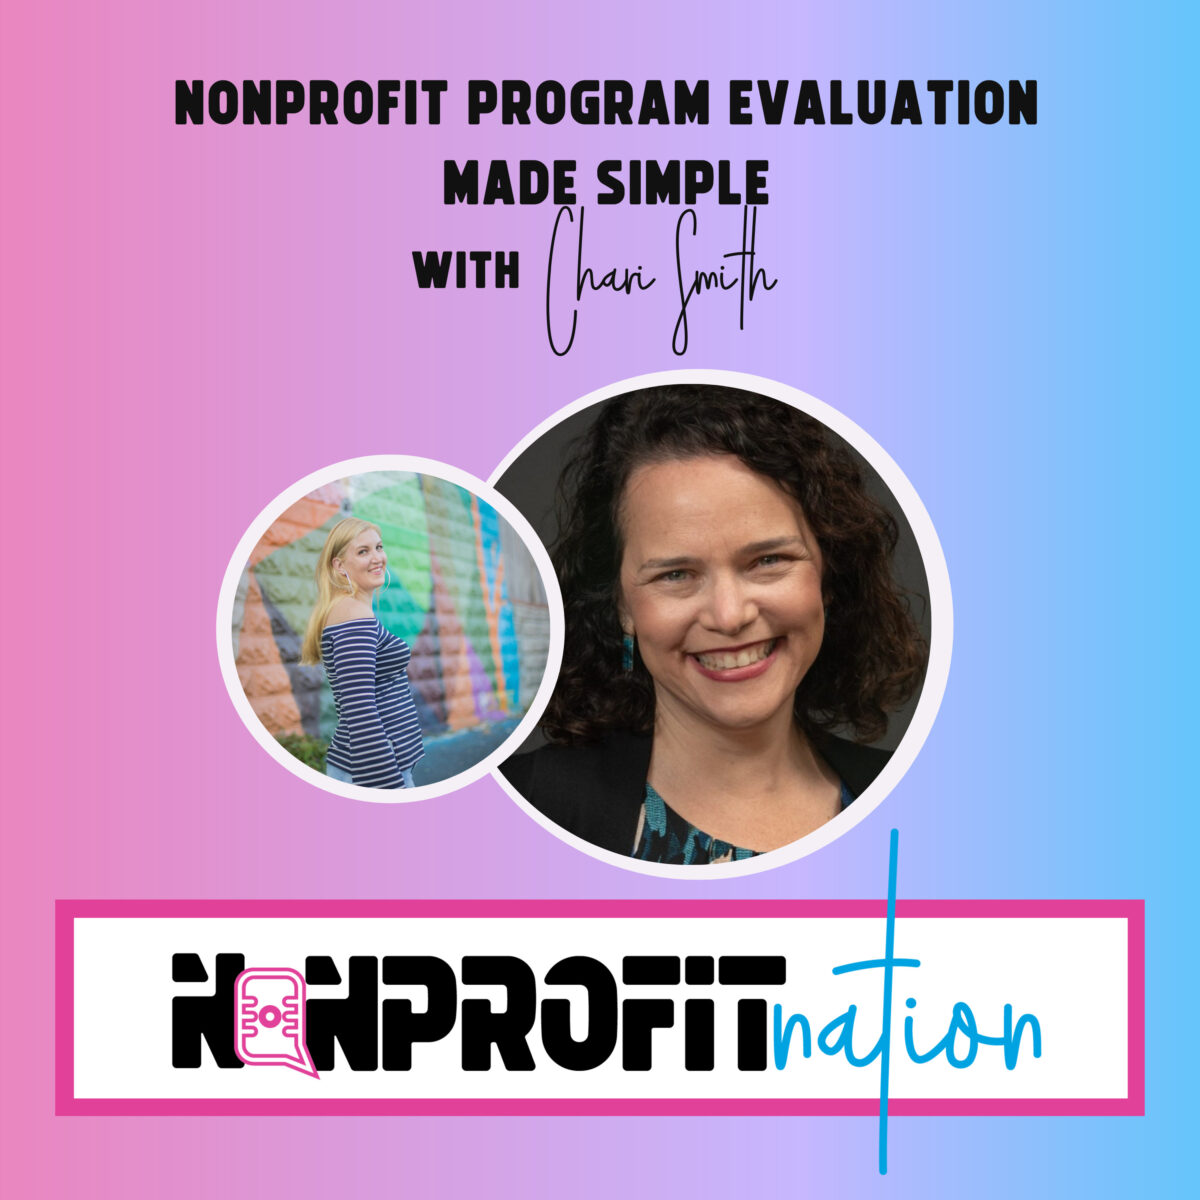 Nonprofit Program Evaluation Made Simple with Chari Smith